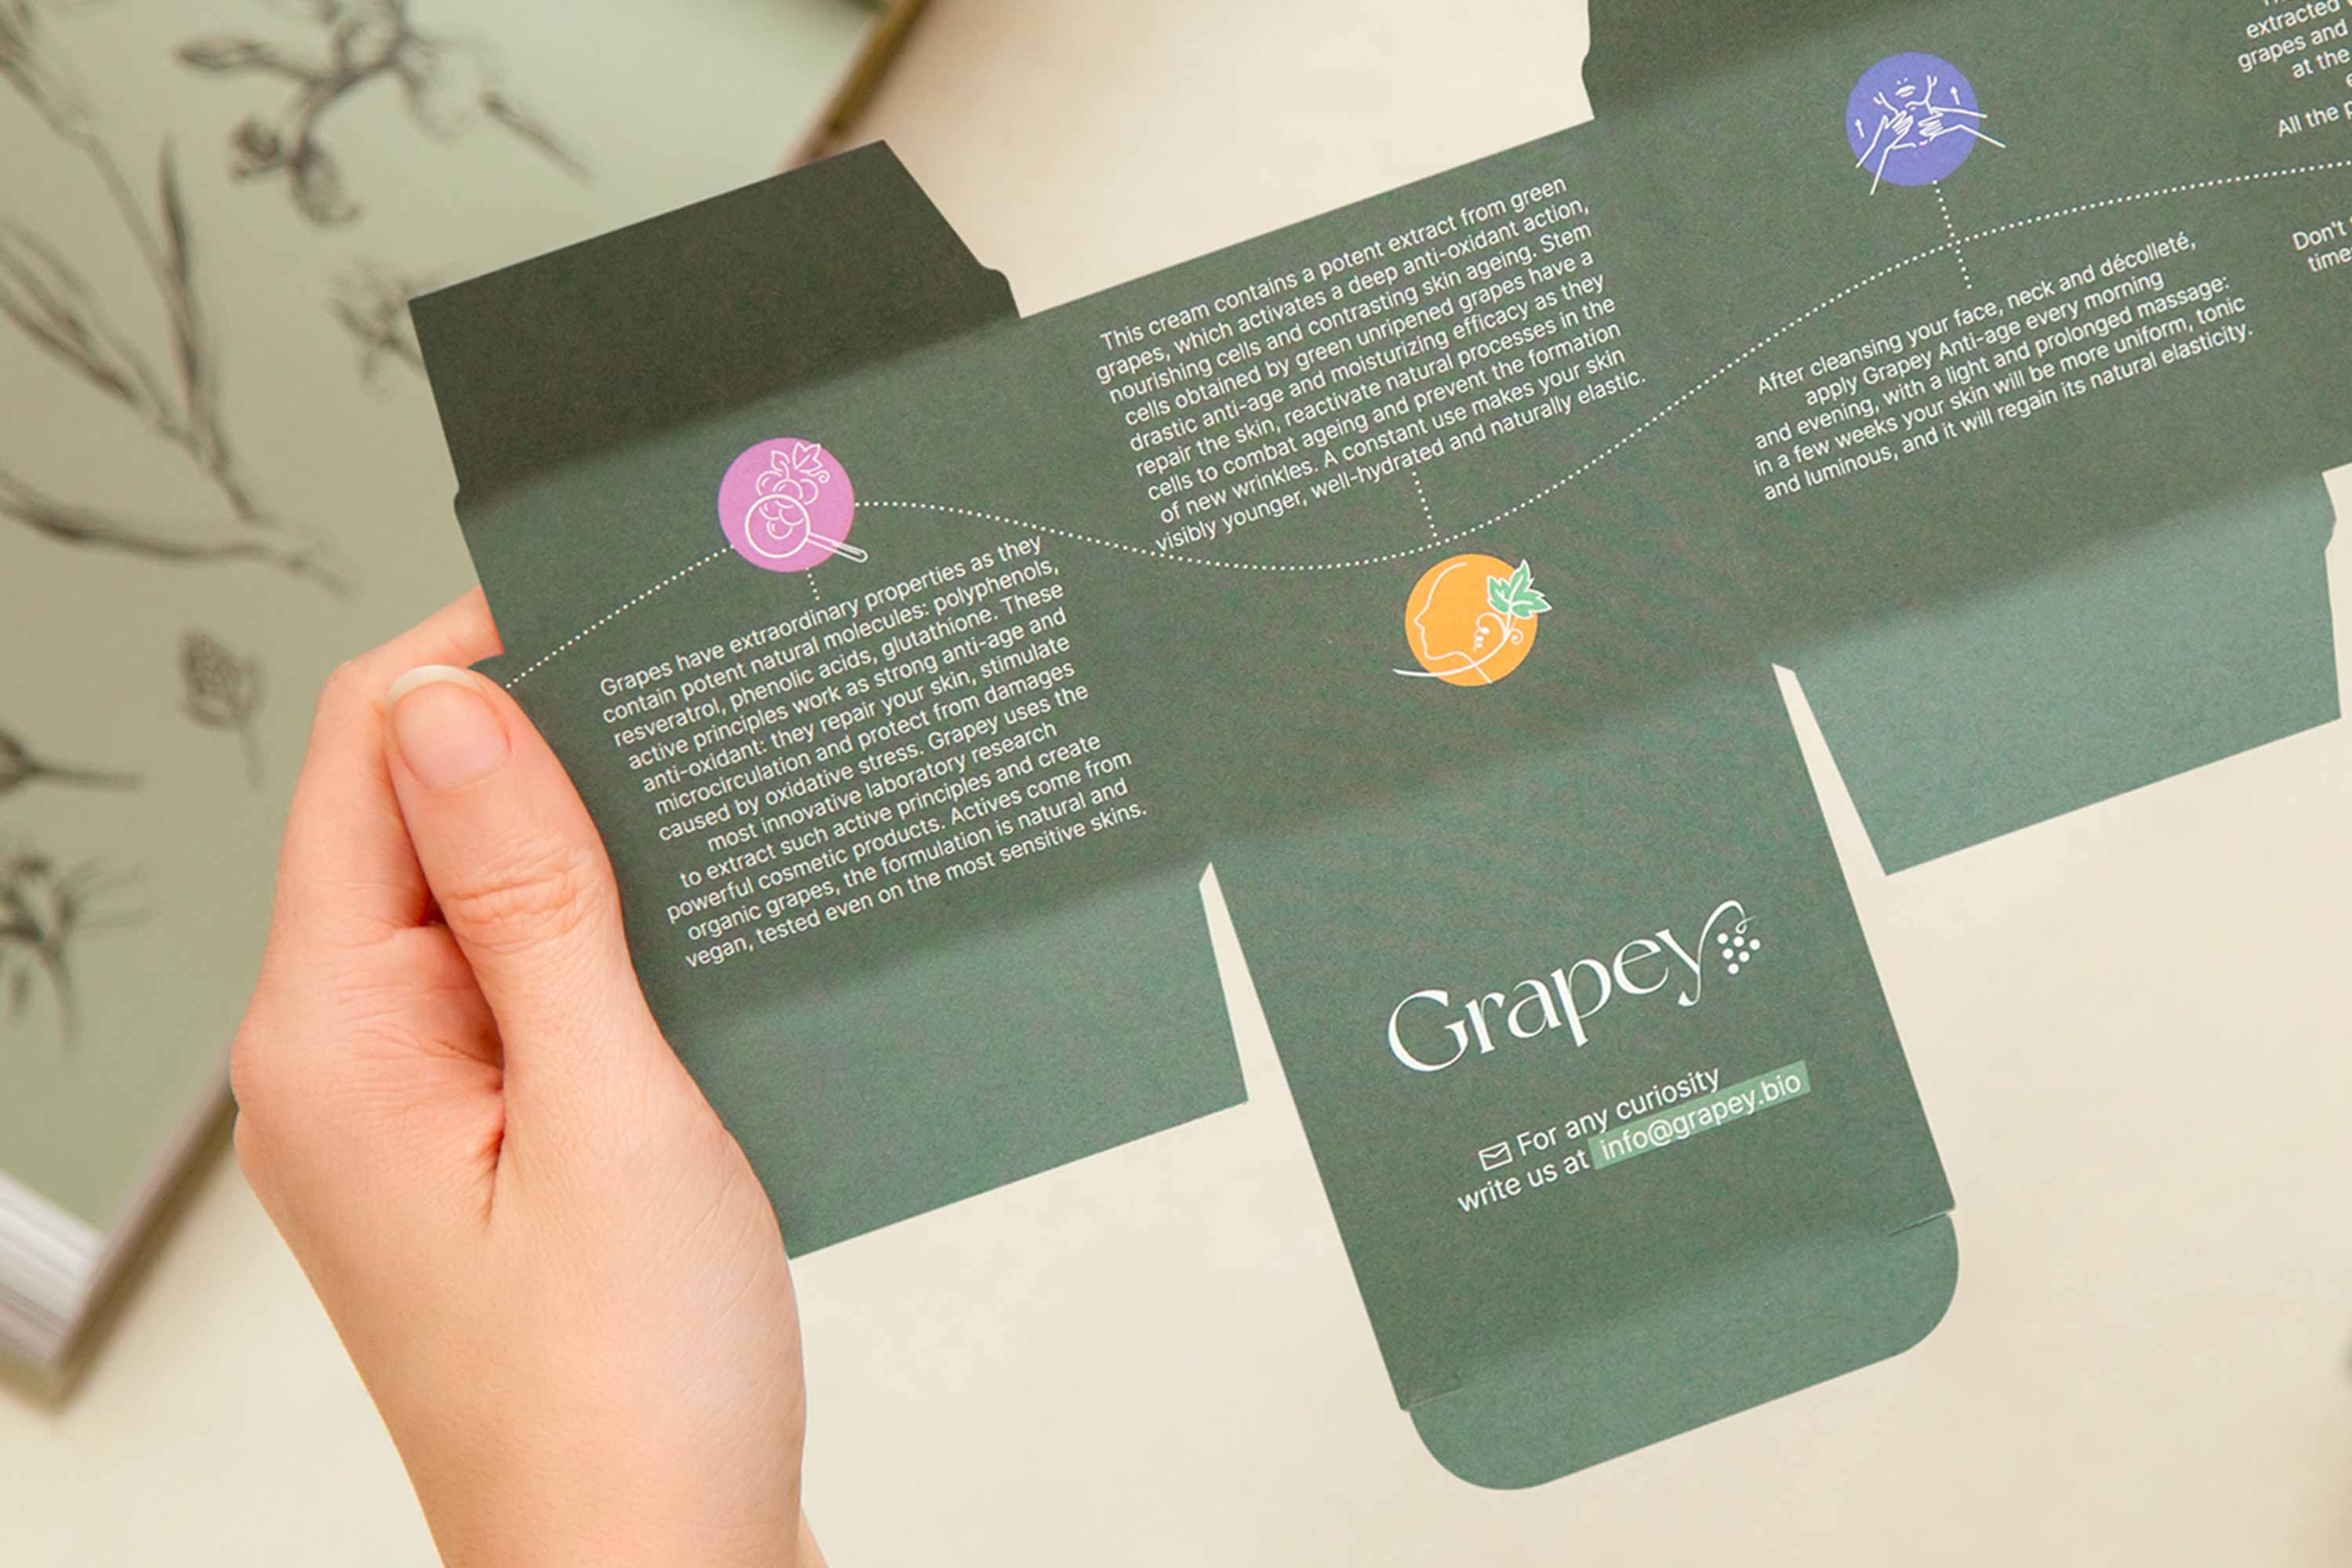 grapey sustainable cardboard packaging with instructions